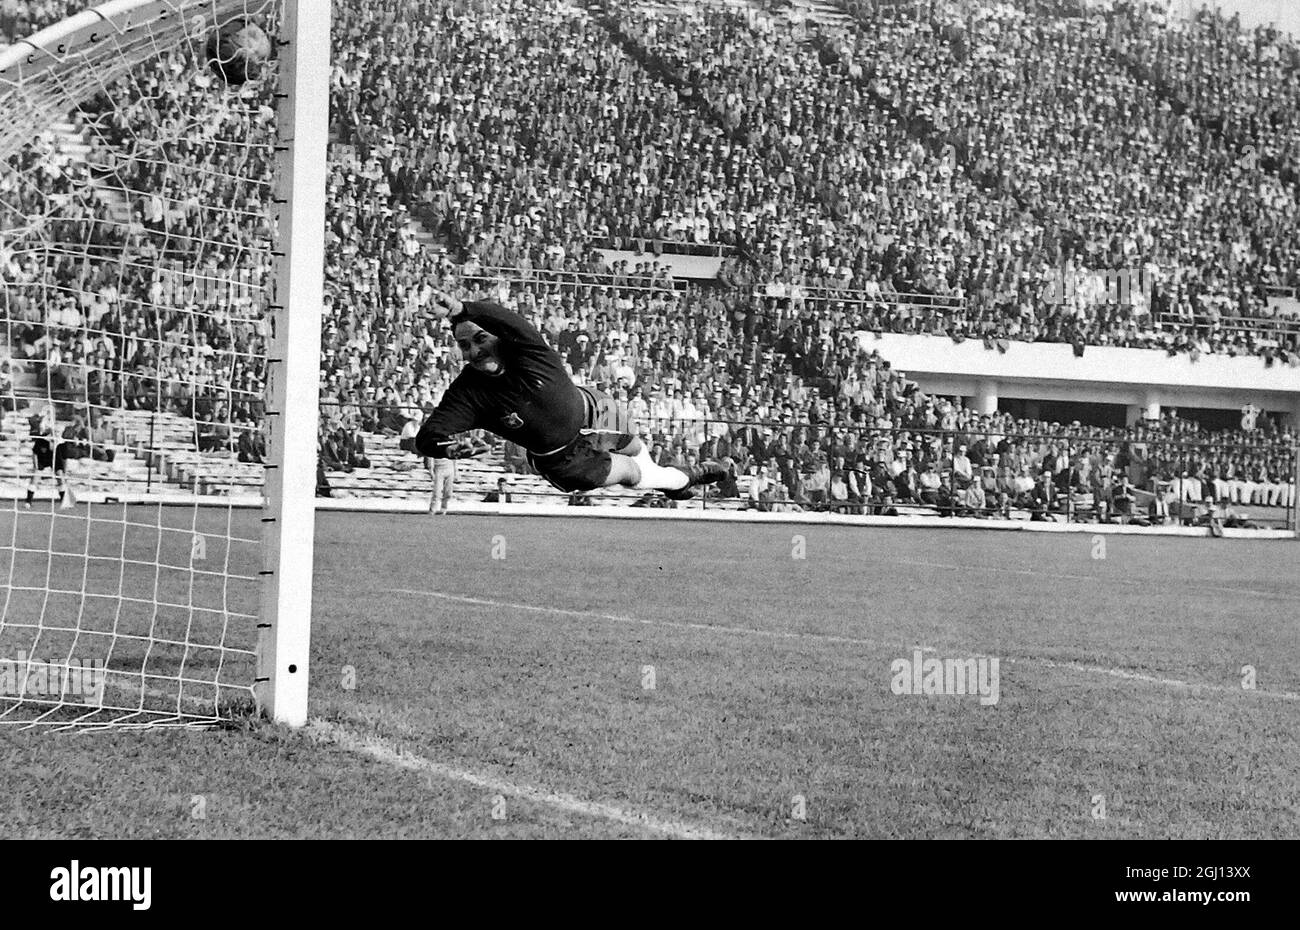 30 MAY 1962 THE FOOTBALL WORLD CUP OPENS IN CHILE WITH THE HOSTS PLAYING SWITZERLAND. THEY LOST 1-0 WHEN THE CHILE GOALKEEPER, ESCUTI, FAILED TO SAVE THIS SHOT ON GOAL. SANTIAGO, CHILE. Stock Photo